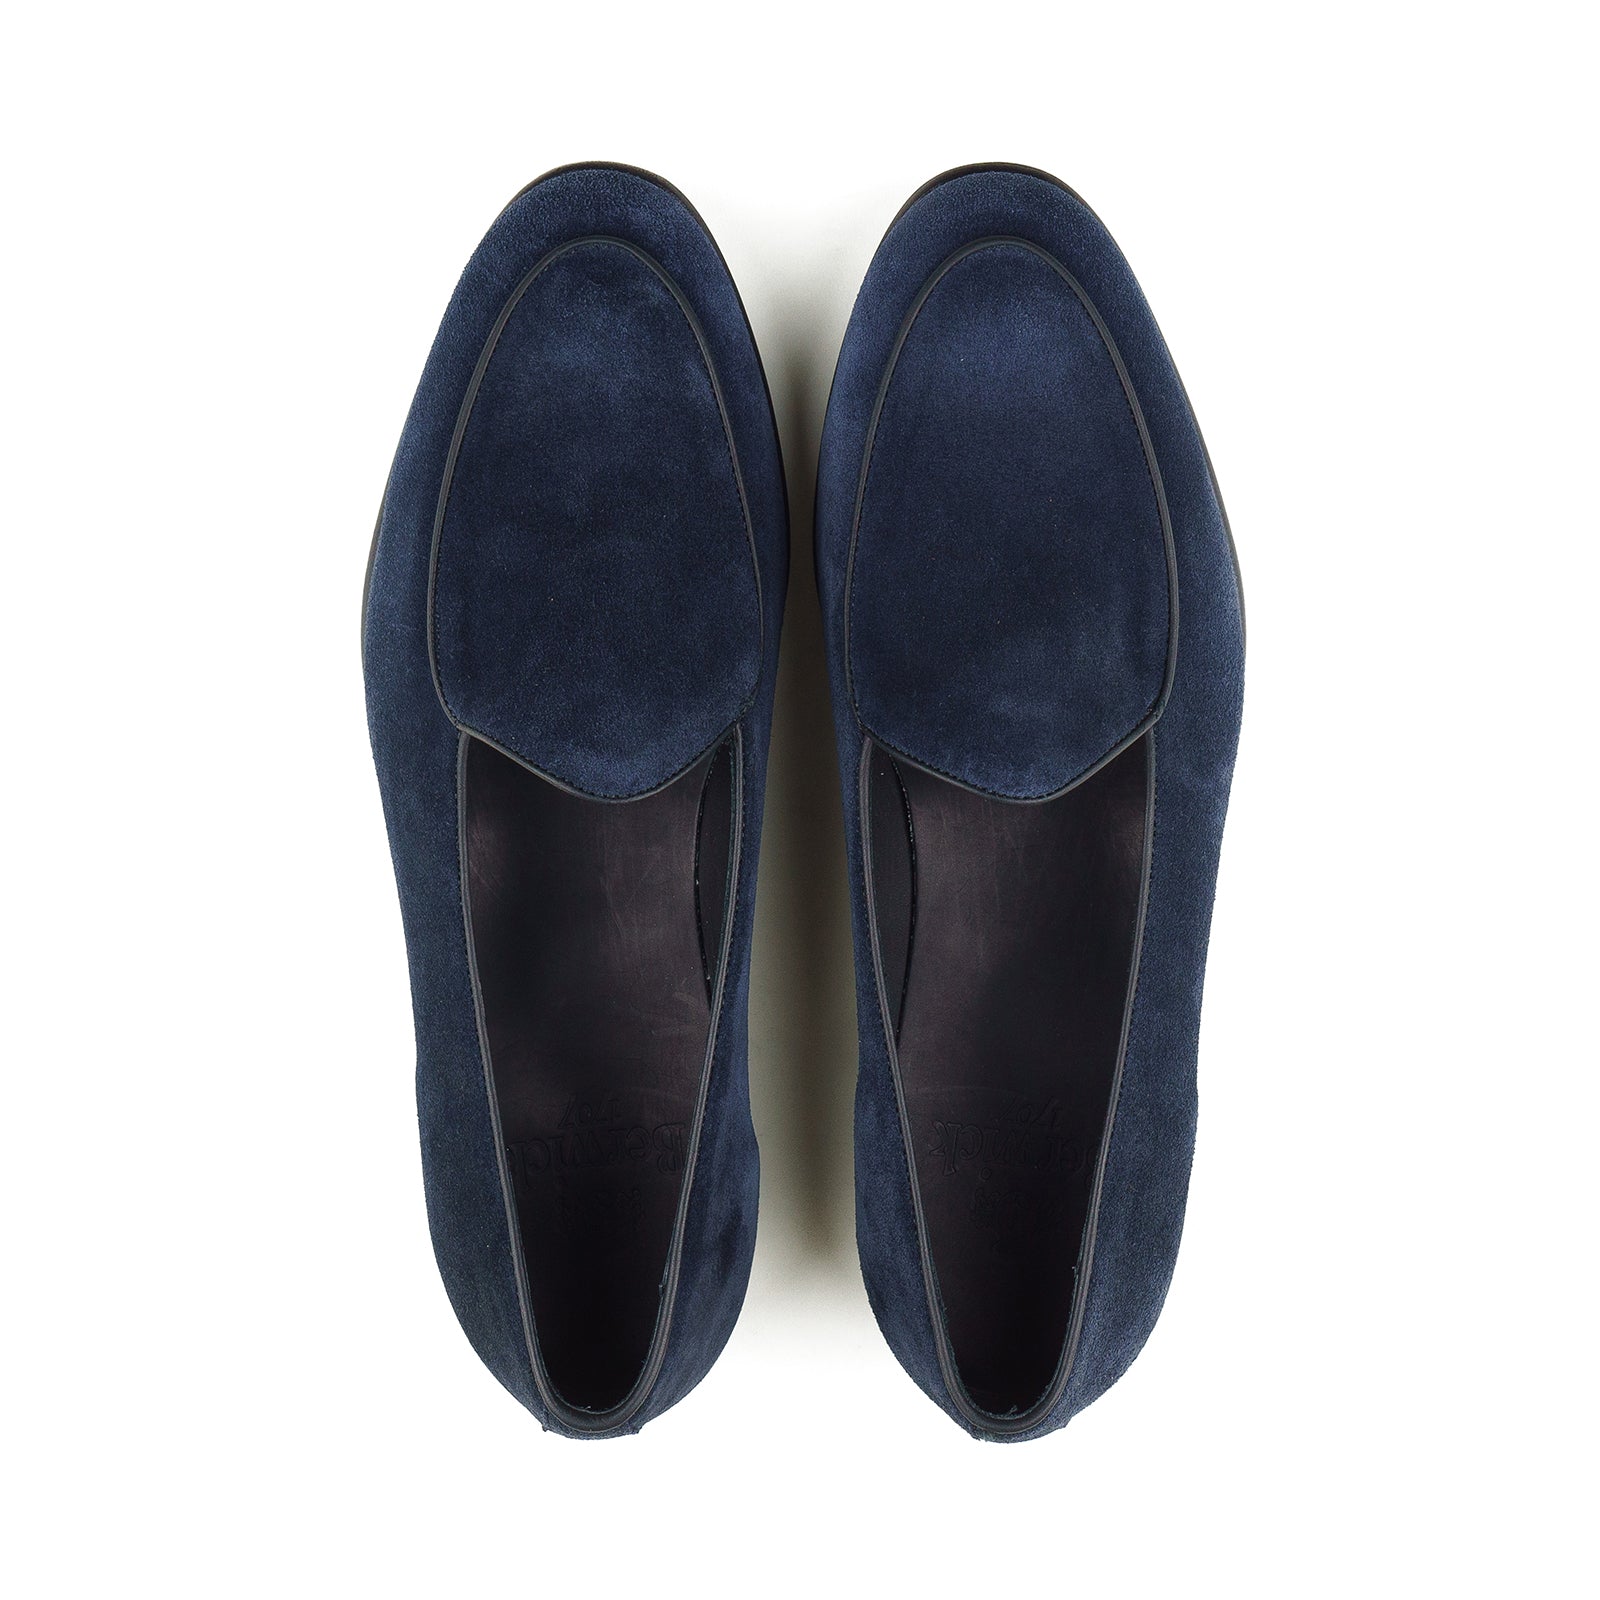 4950 Belgian Loafer - Baltic Navy Repello Suede